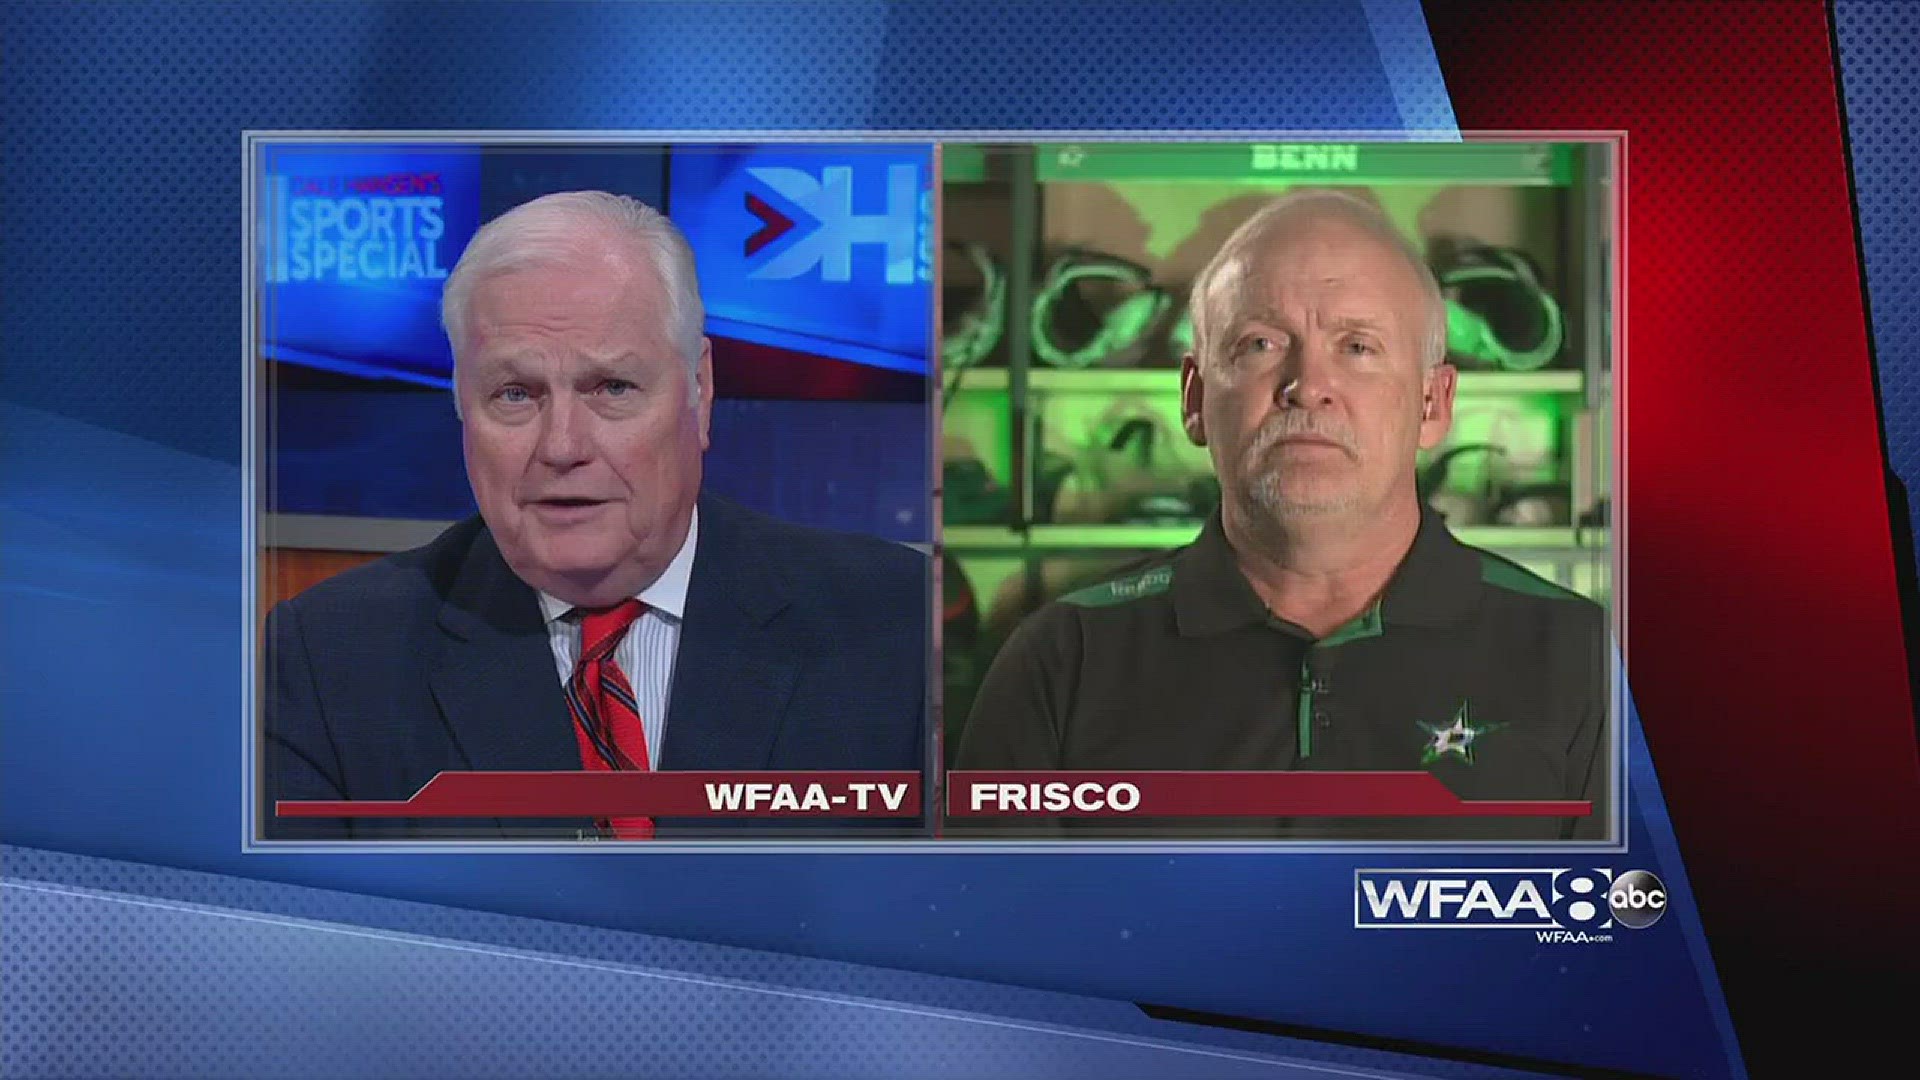 Dallas Stars head coach Lindy Ruff joins Dale Hansen to talk about the playoff picture on Sports Special.